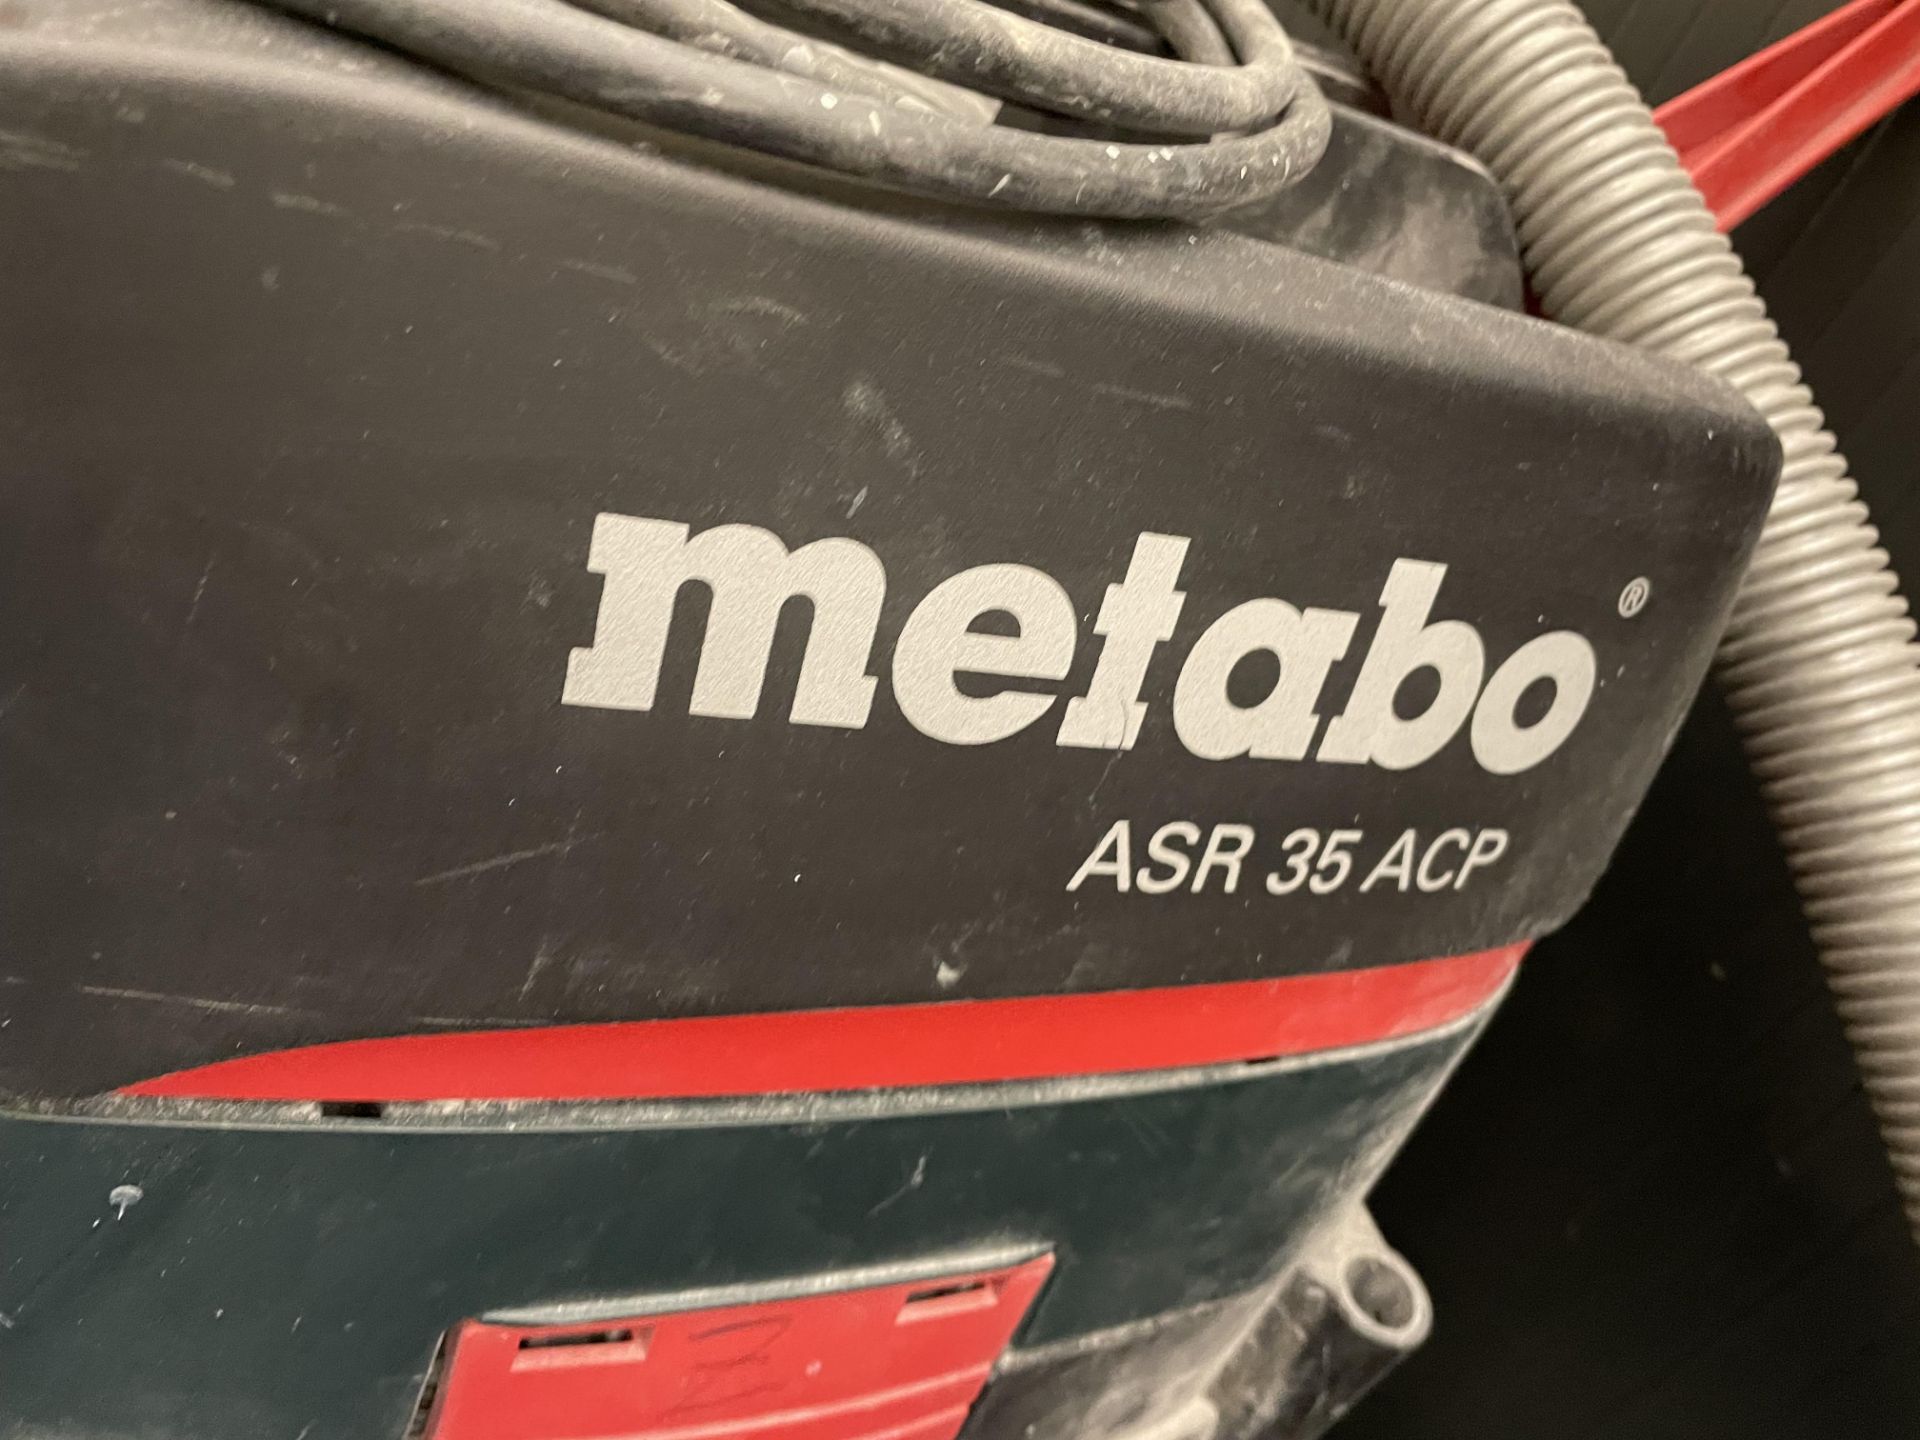 Metabo ASR 35 ACP and ASR 25 LSC Vacuum with 2x Metabo Similars, 240v - Image 6 of 9